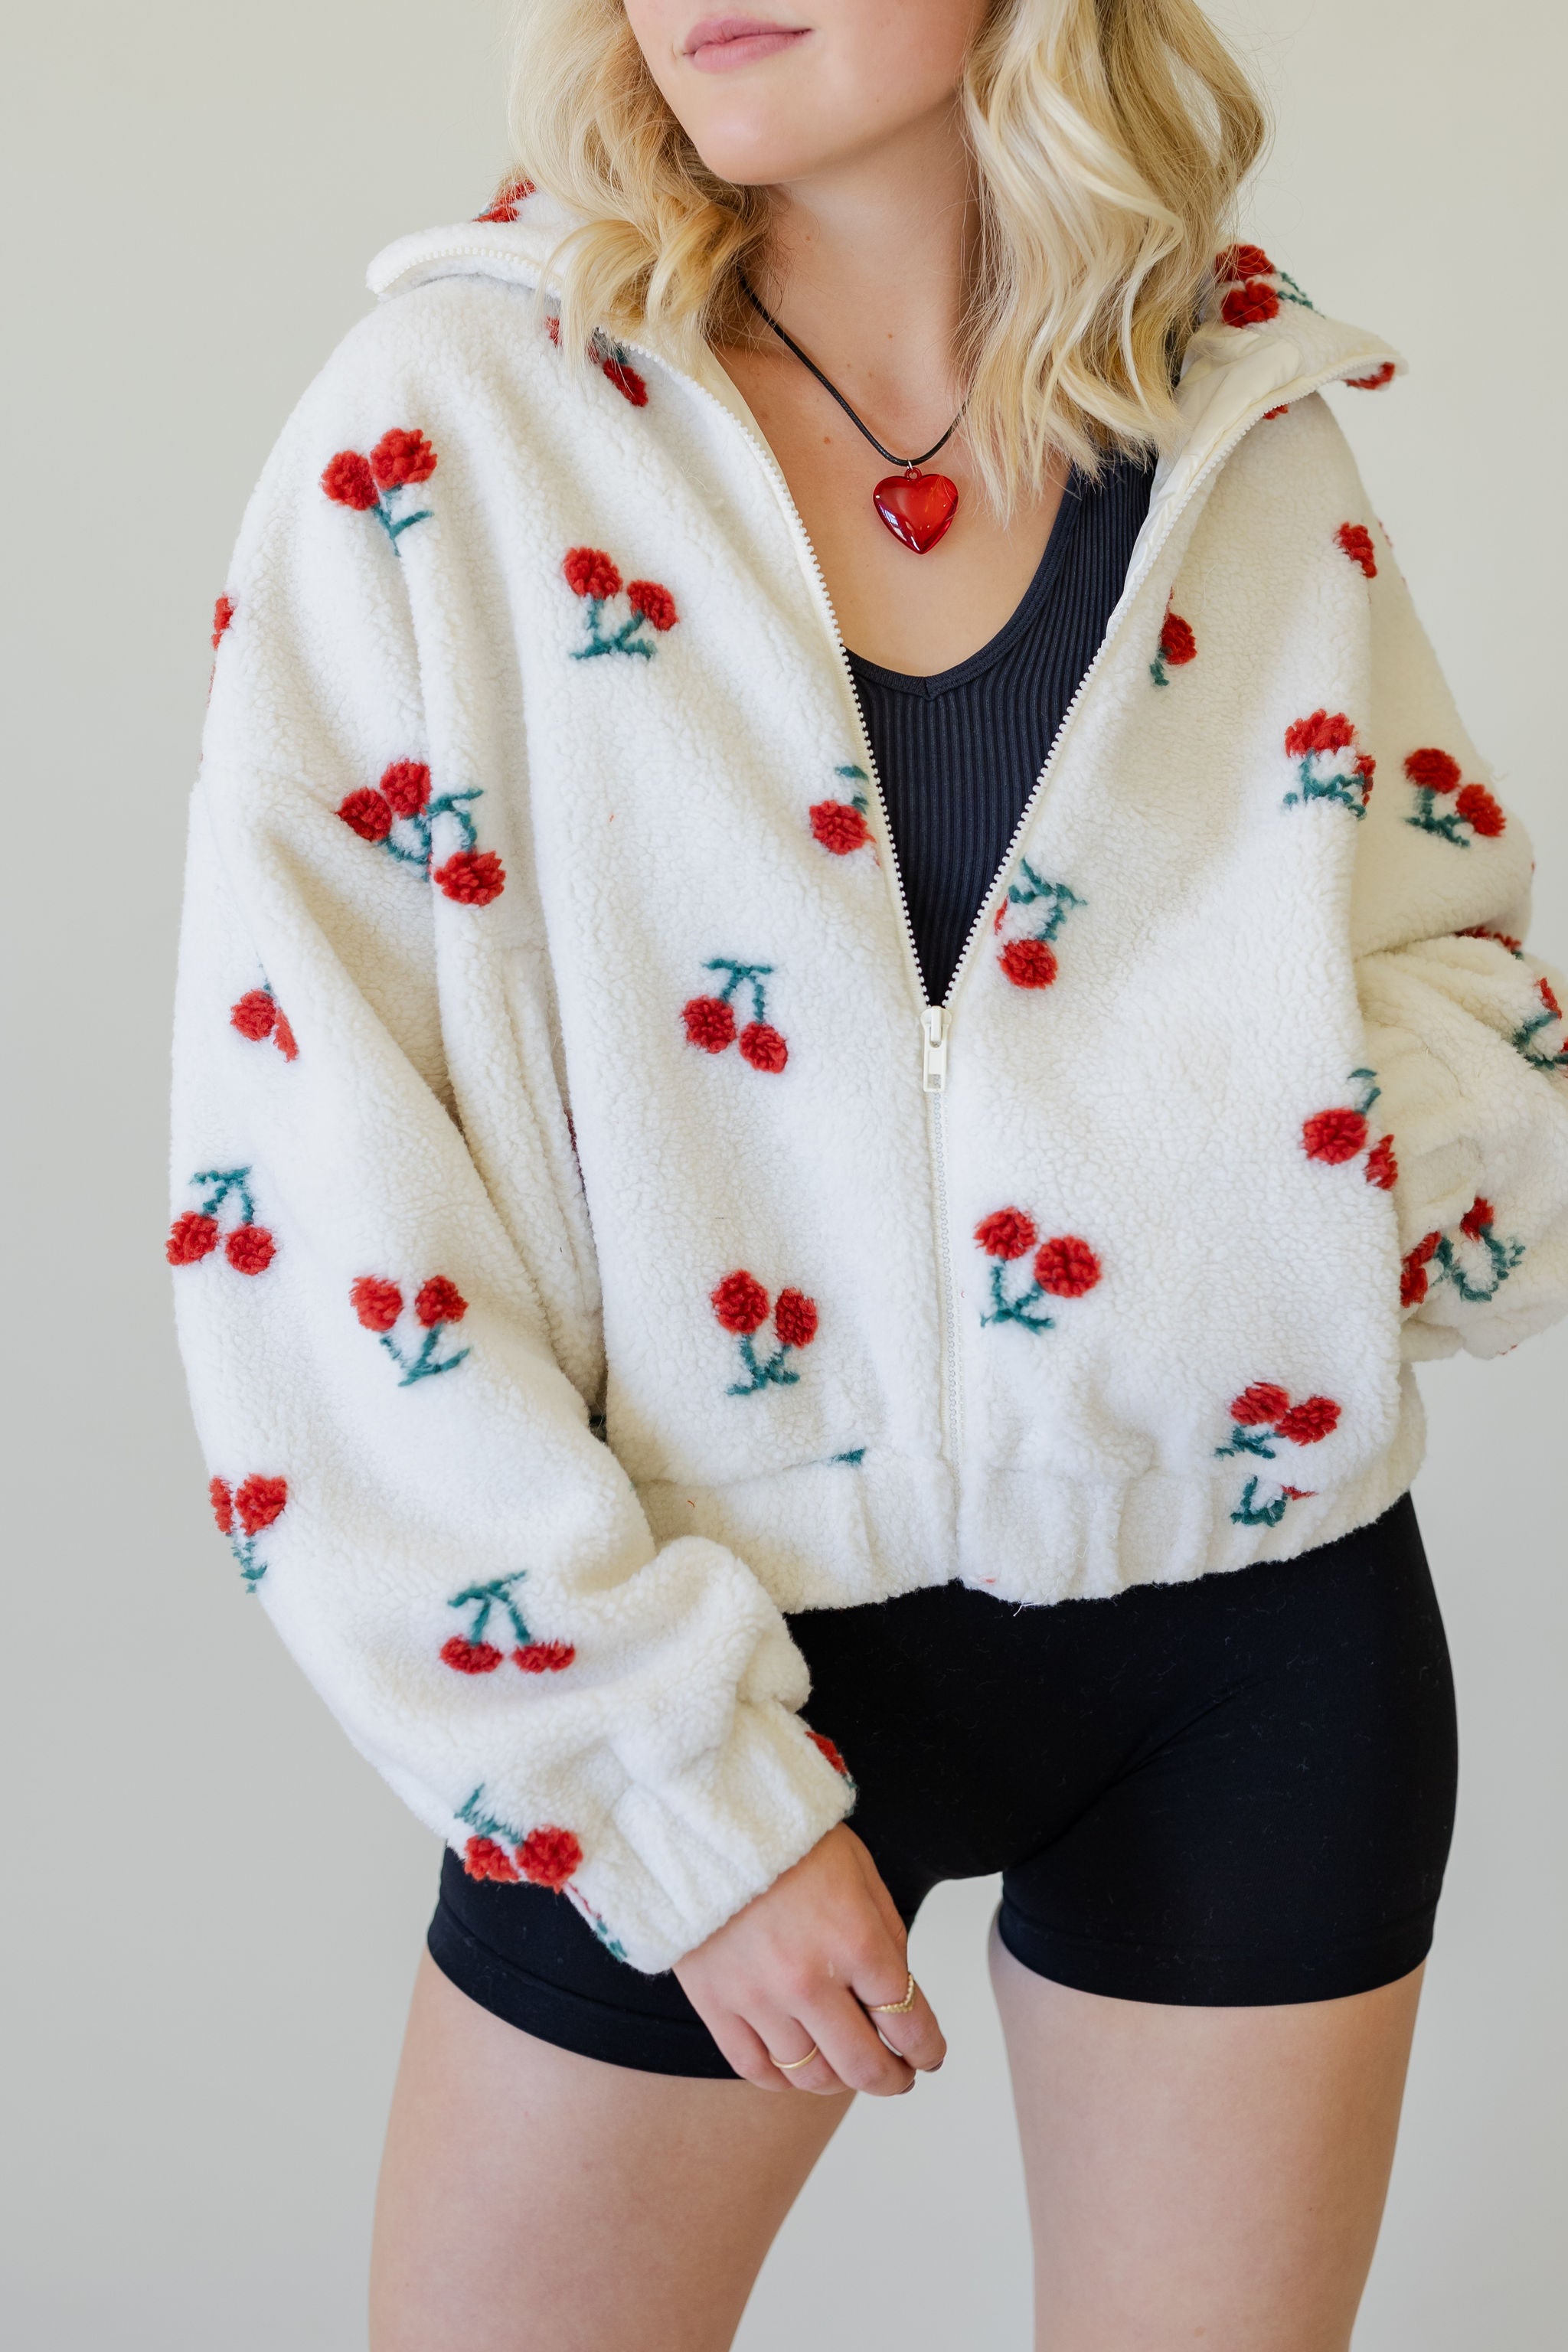 Moving On Cherry Printed Jacket by For Good